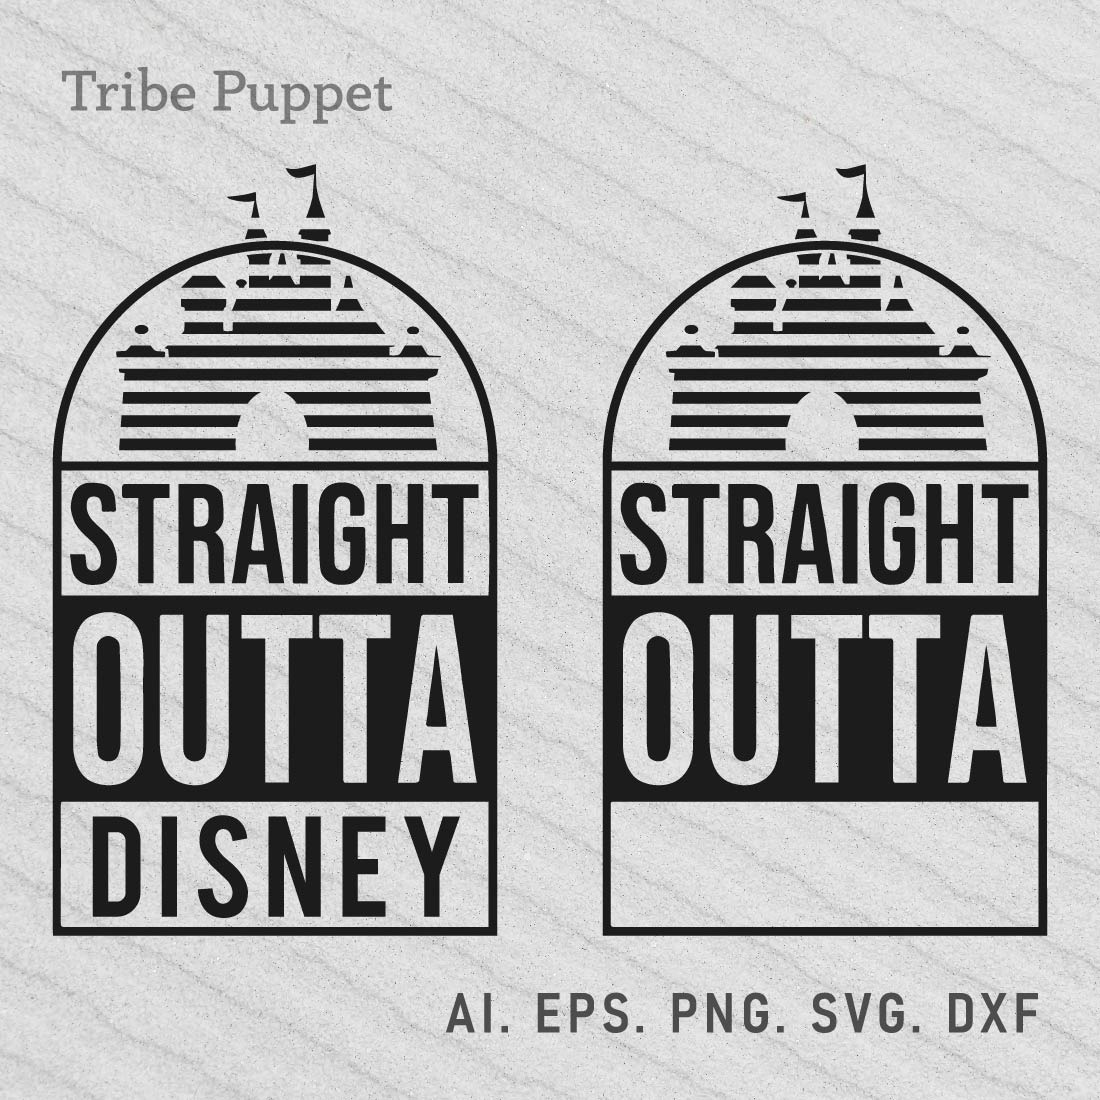 Straight outta disney preview image.